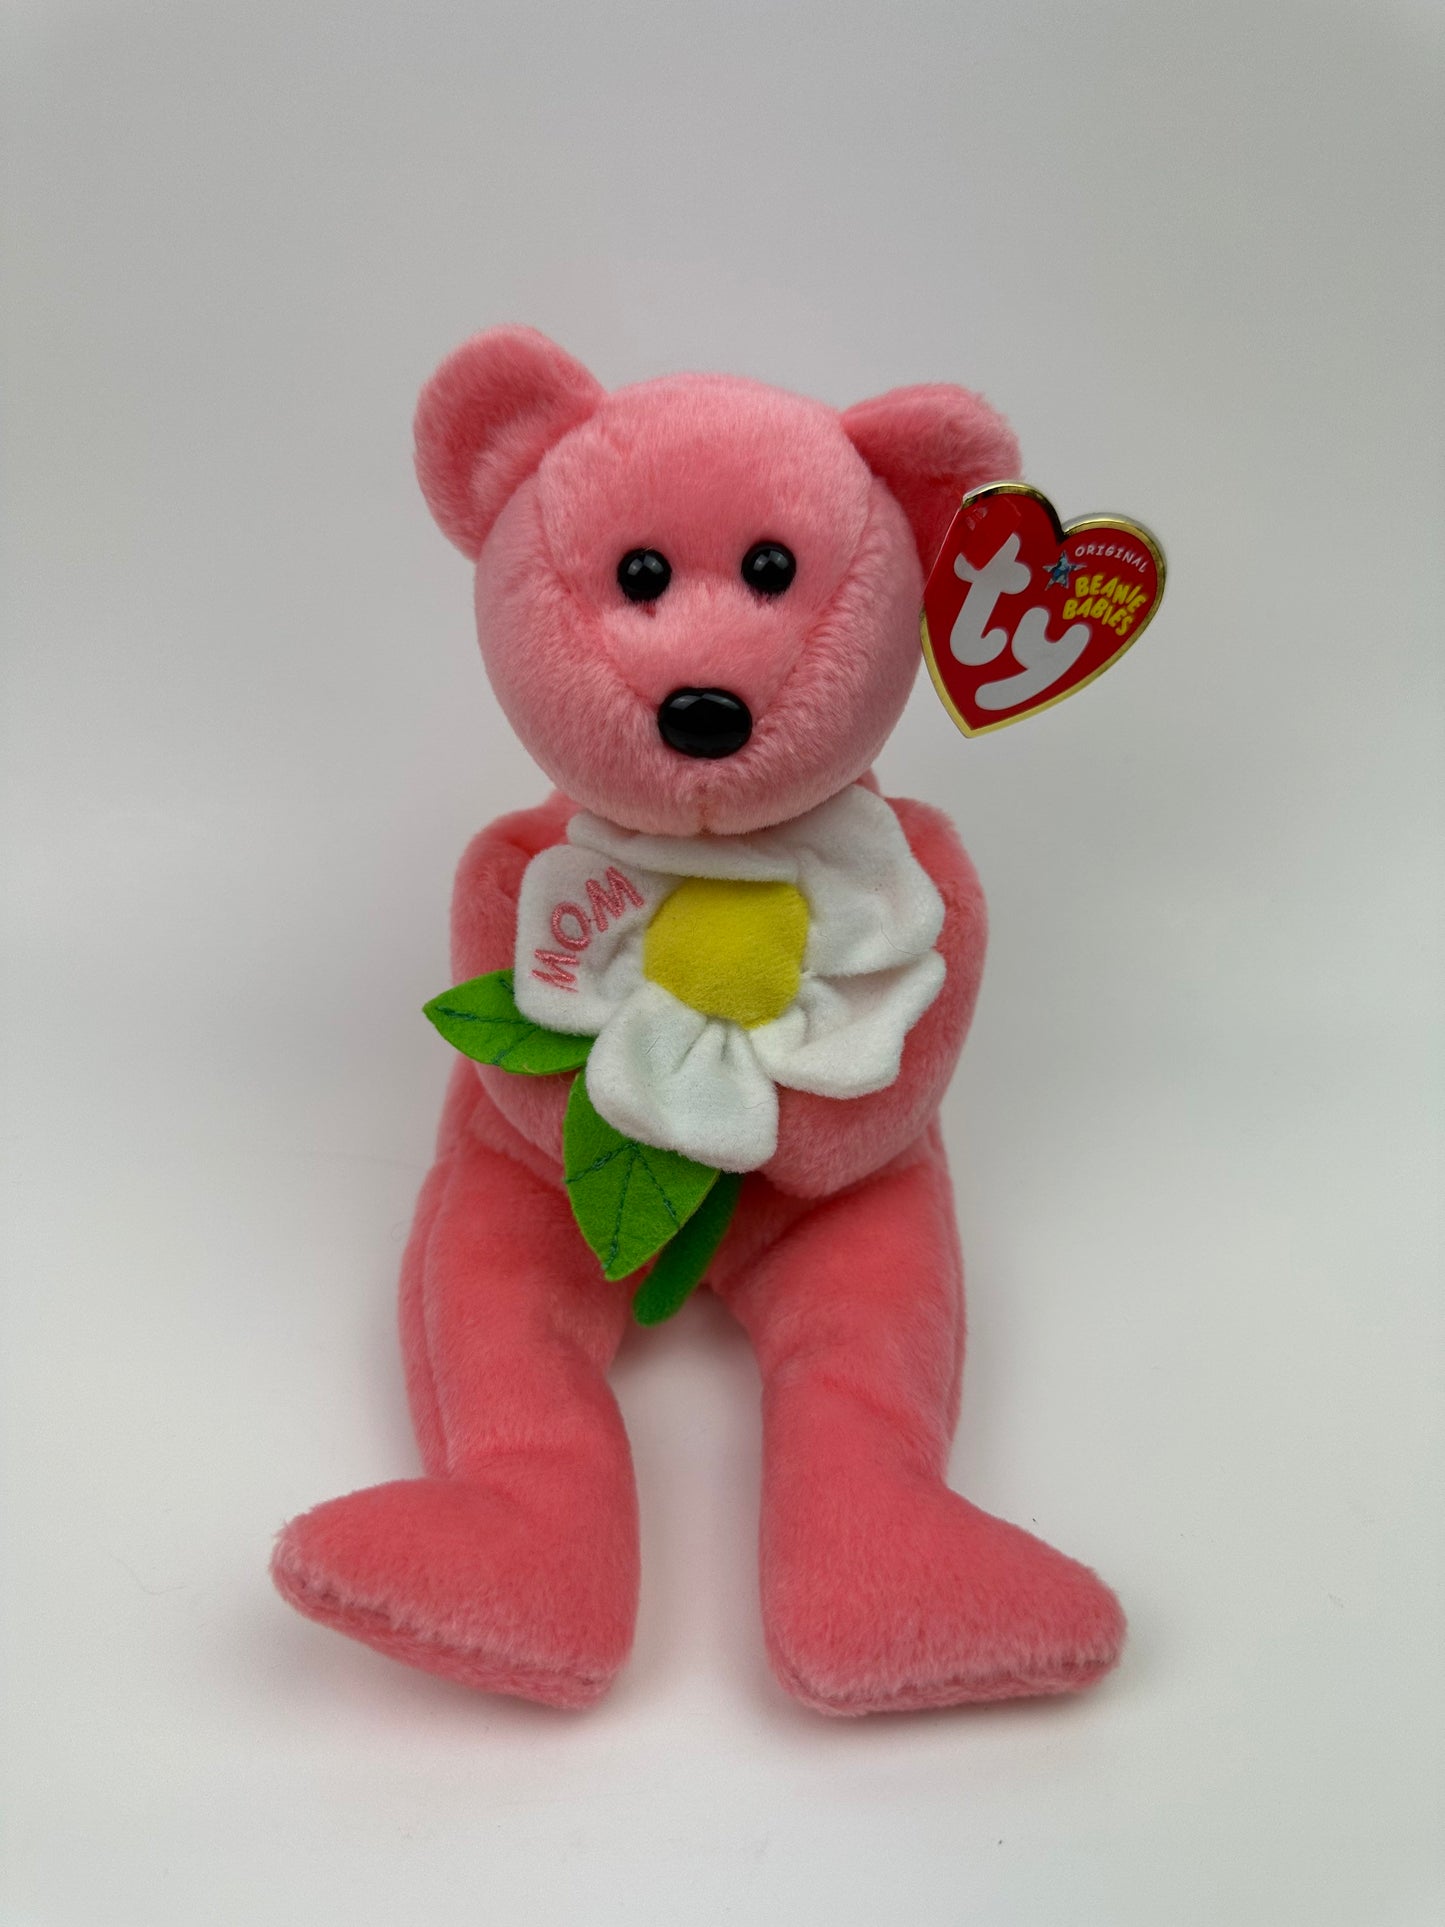 Ty Beanie Baby Bear “Dearly” the Mother’s Day or Gift for Mom Bears *Hallmark Gold Crown Exclusive* (8.5 inch)